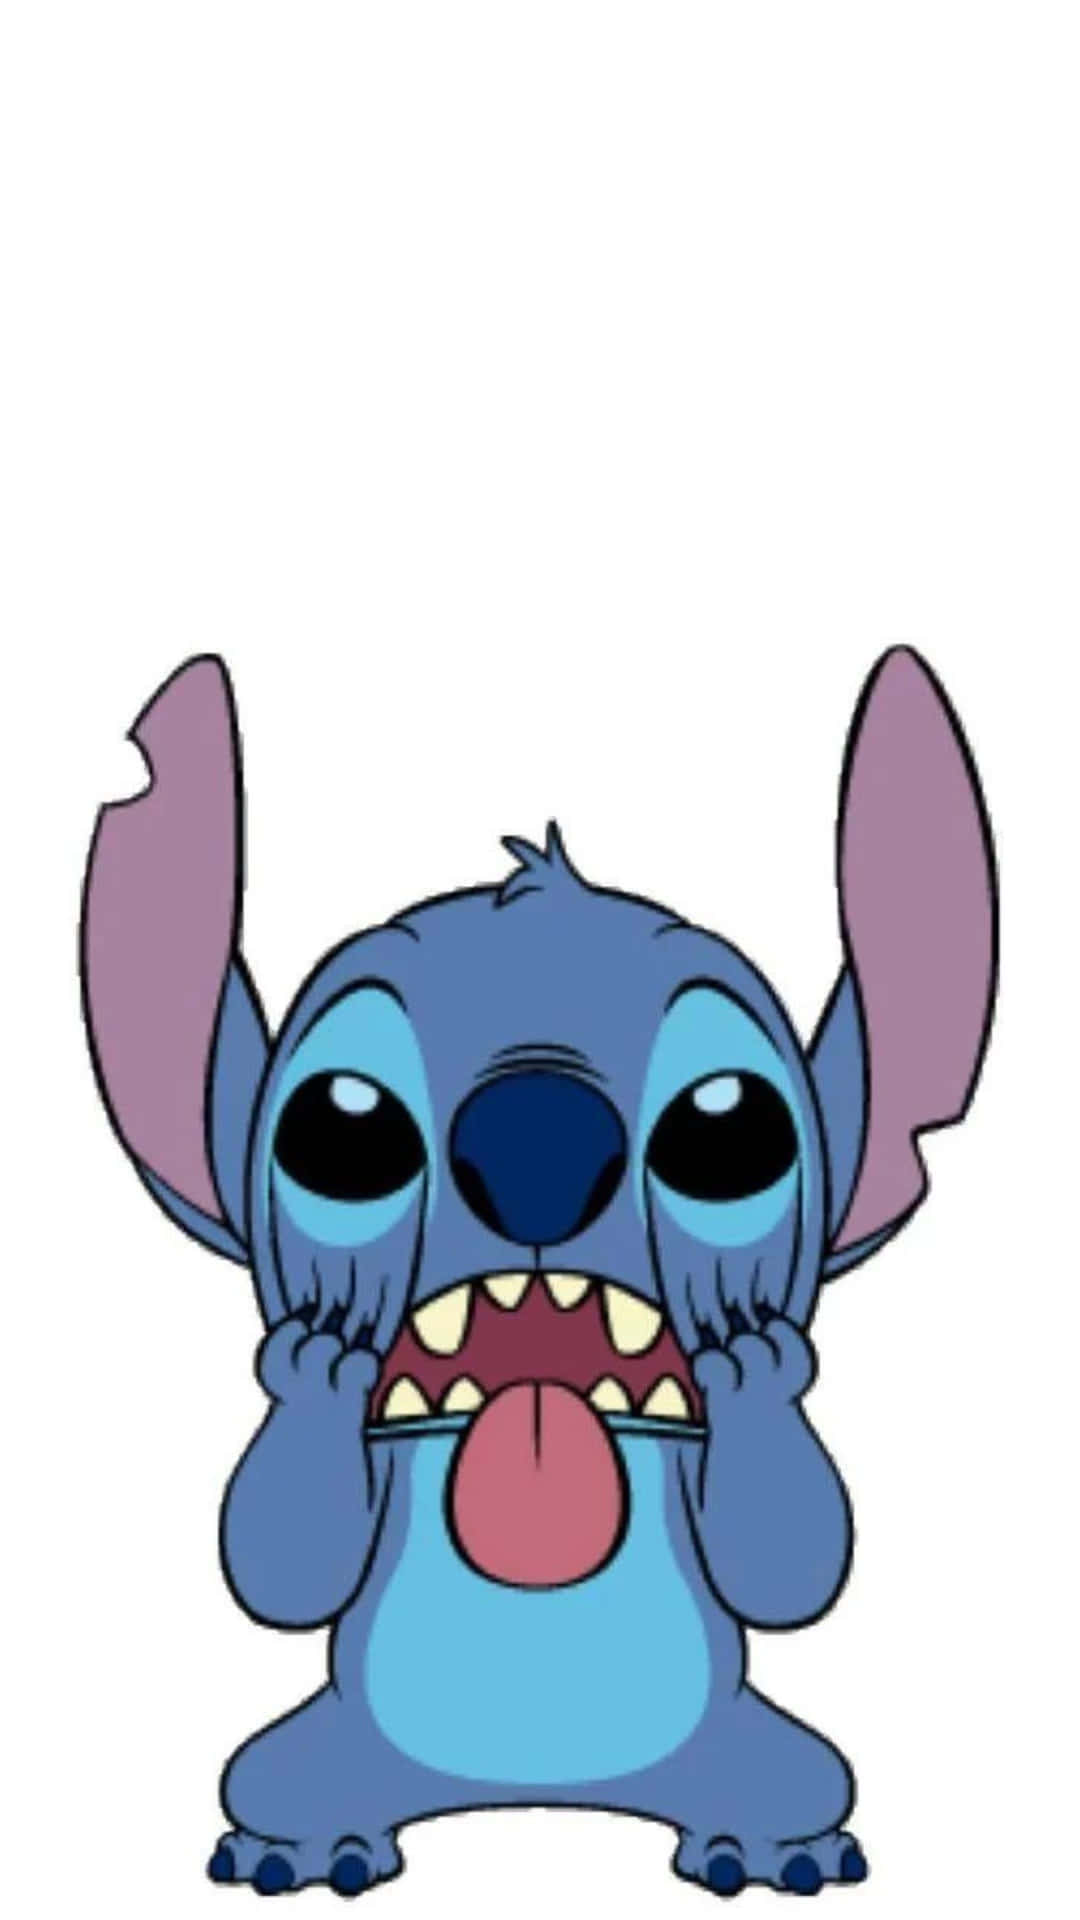 Funny Stitch Making Face Wallpaper